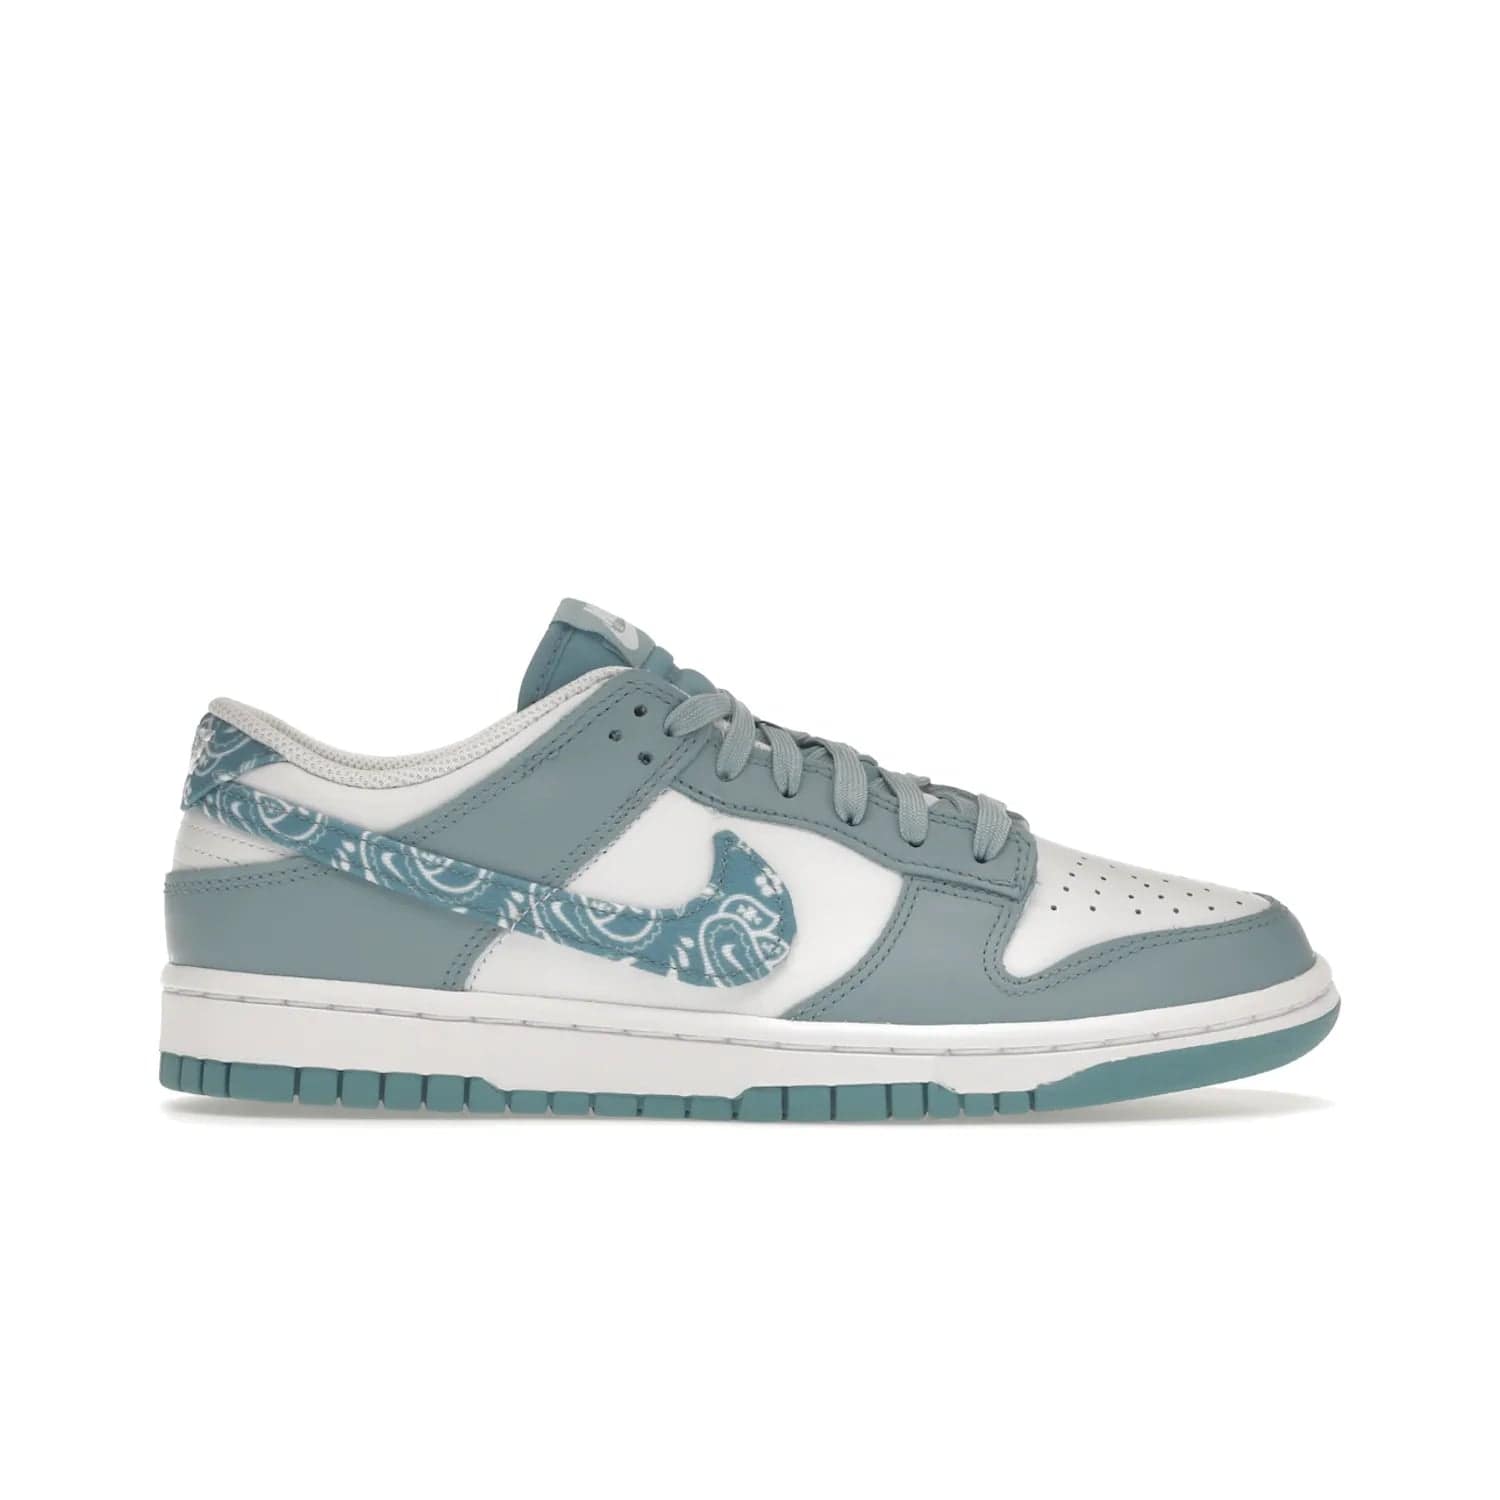 Nike Dunk Low Essential Paisley Pack Worn Blue (Women's) - Image 1 - Only at www.BallersClubKickz.com - Get the Nike Dunk Low Essential Paisley Pack Worn Blue (Women's) for style and comfort. White leather construction, light blue leather overlays, canvas Swooshes and matching heel tabs offer a rich blue hue. Finished by a white and light blue sole, this classic Nike Dunk is the perfect addition to any wardrobe. Released in March 2022.